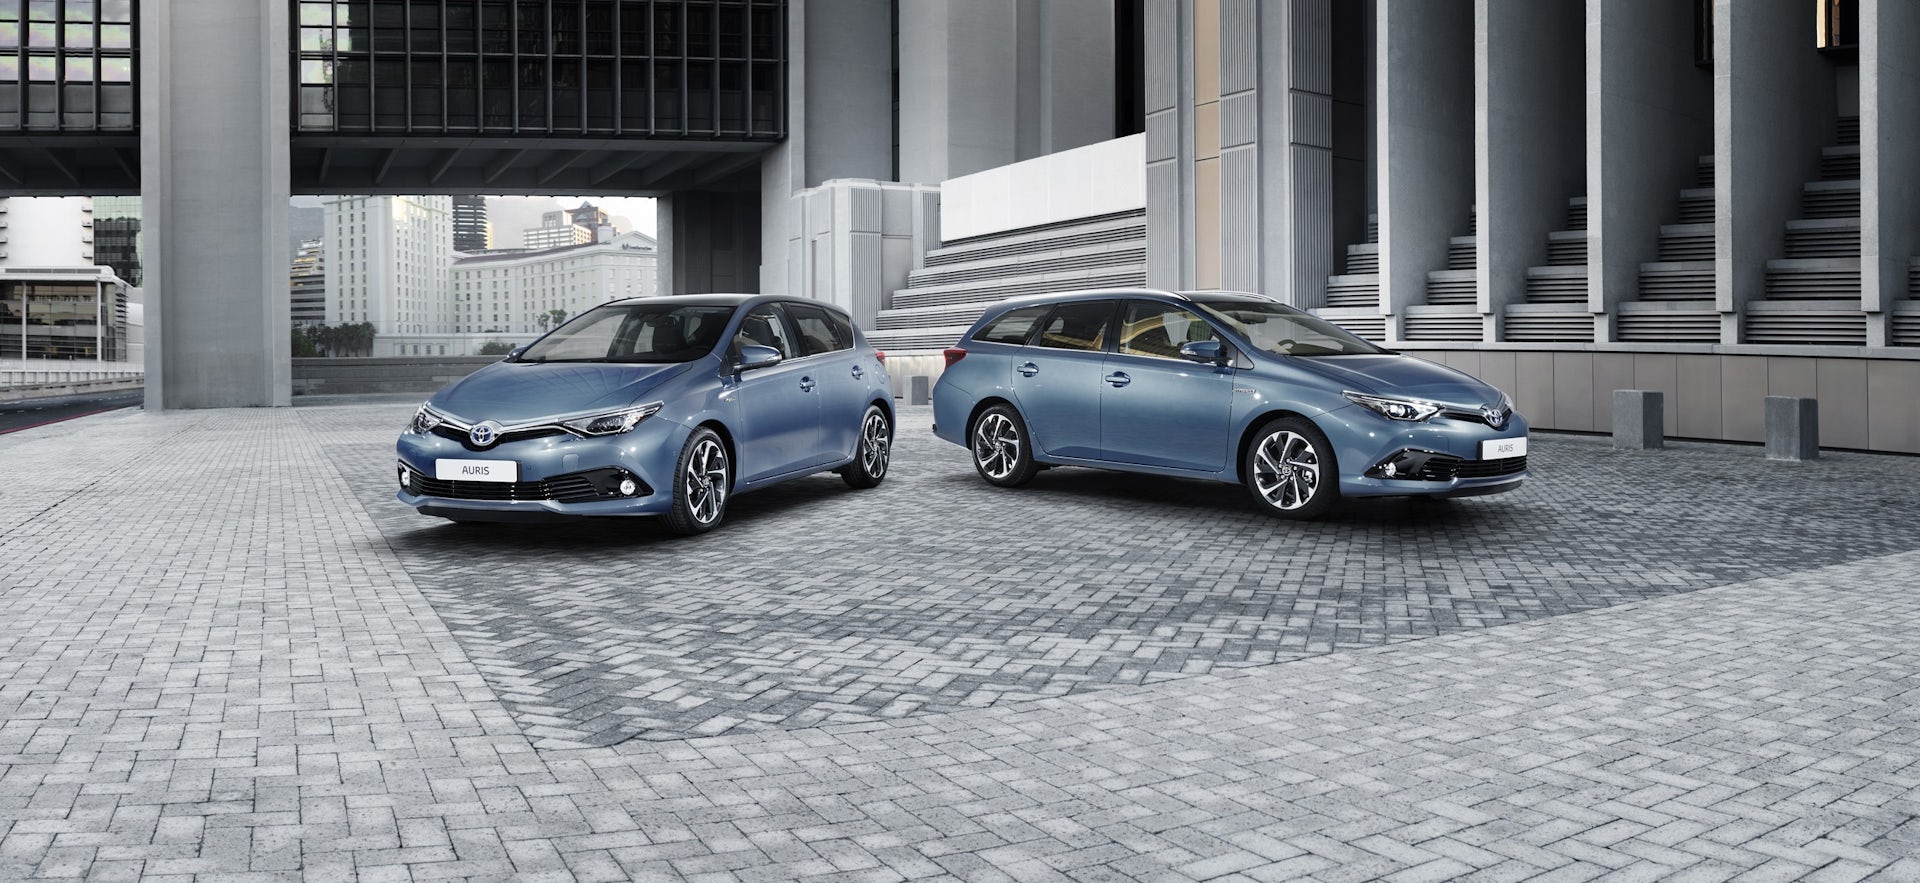 Au revoir to the old as Toyota reveals new Auris carwow